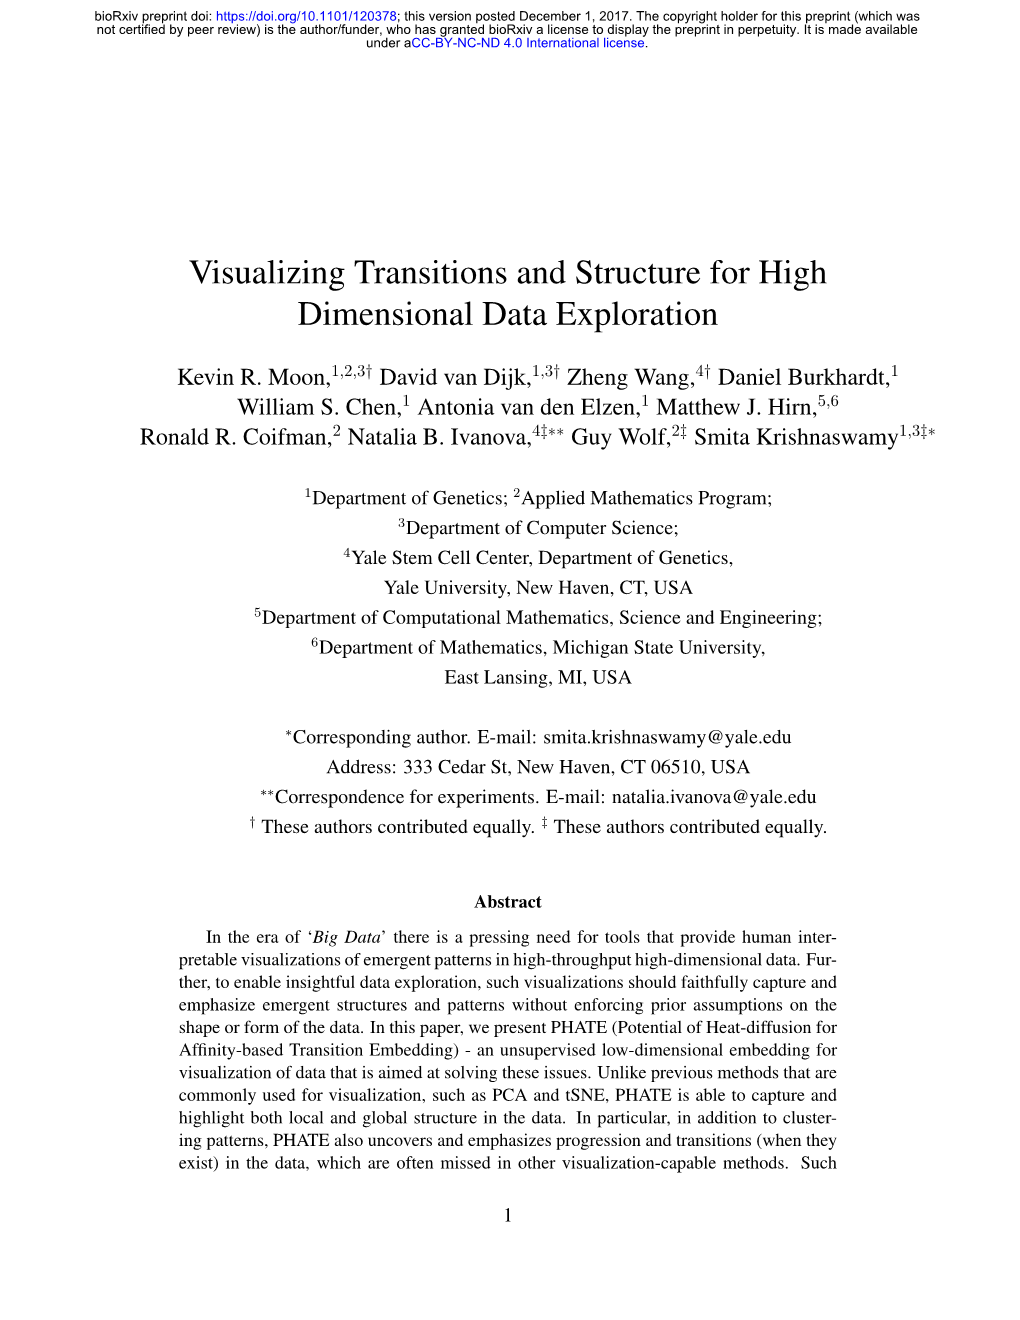 Visualizing Transitions and Structure for High Dimensional Data Exploration